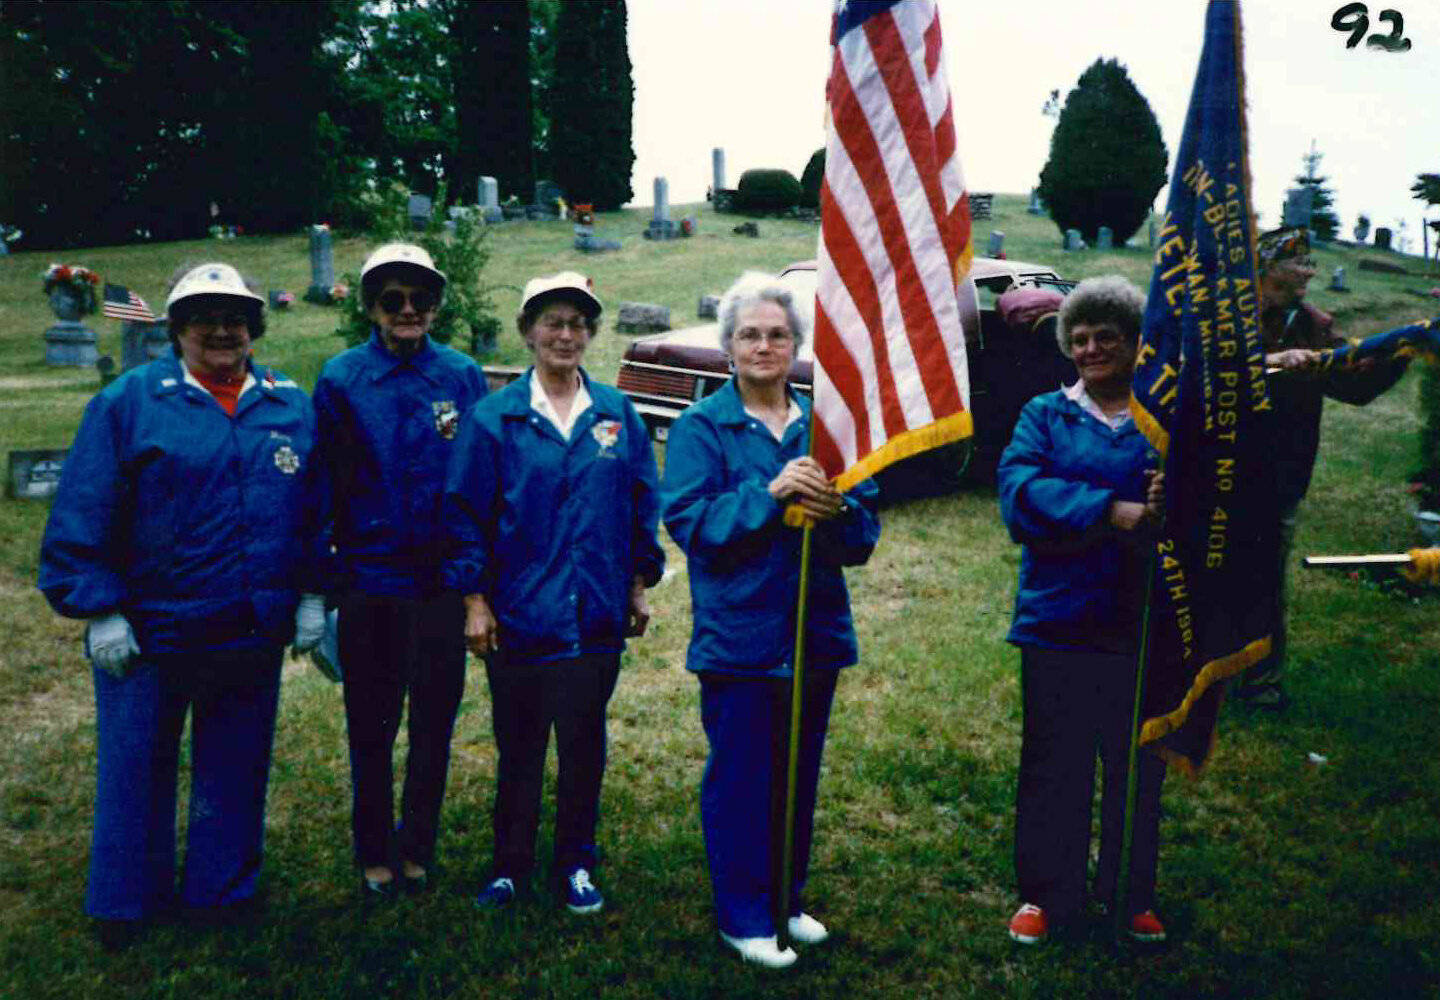 VFW members with flag